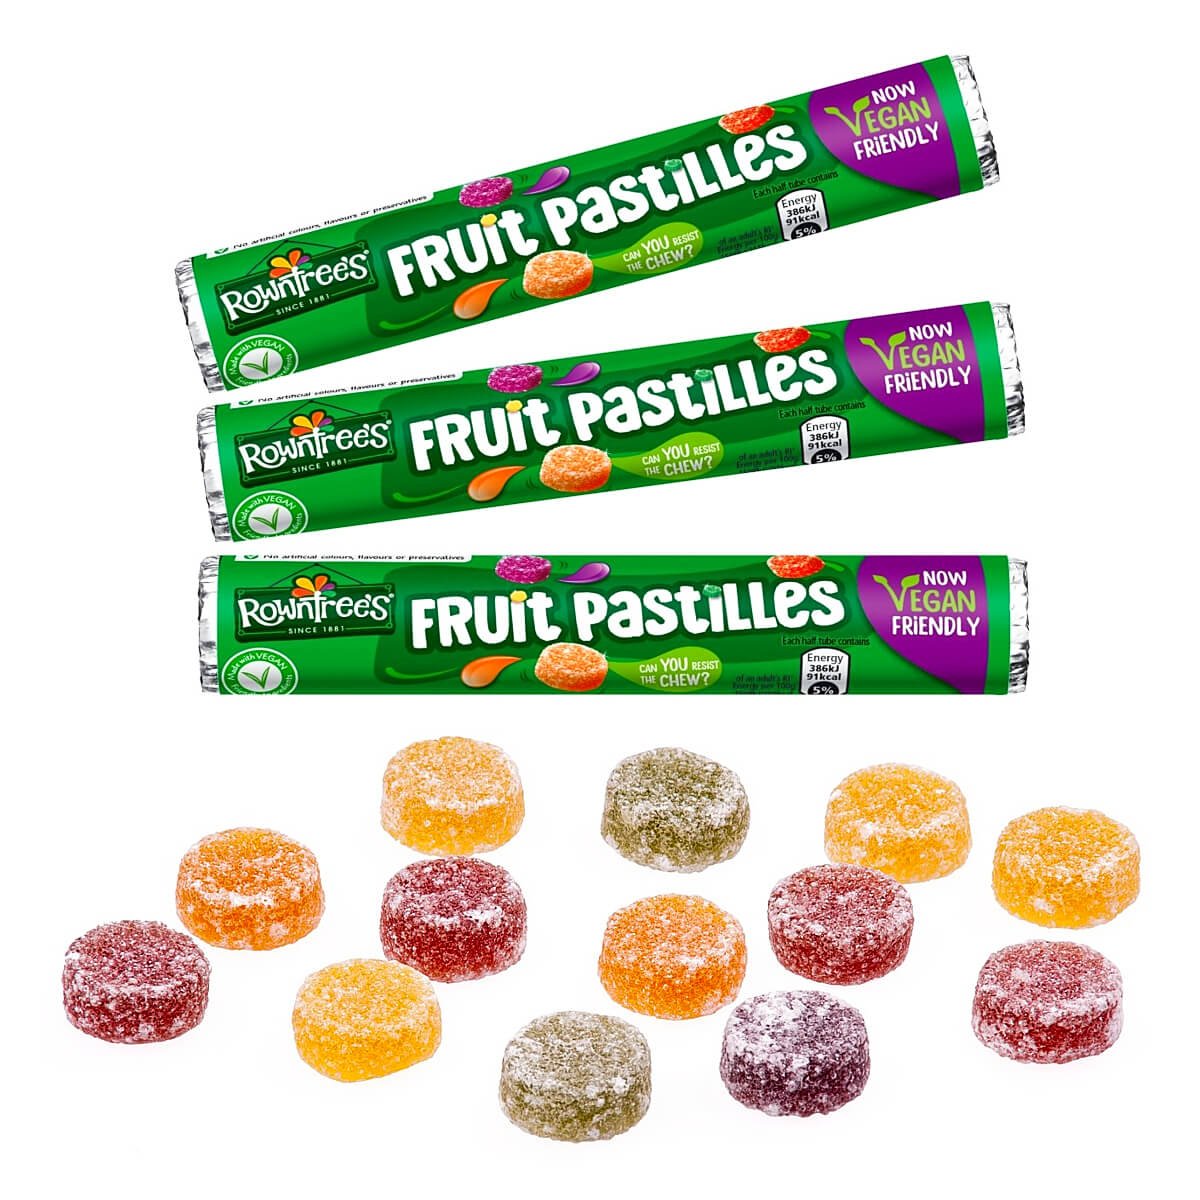 Essential Facts About Rowntree's Fruit Pastilles